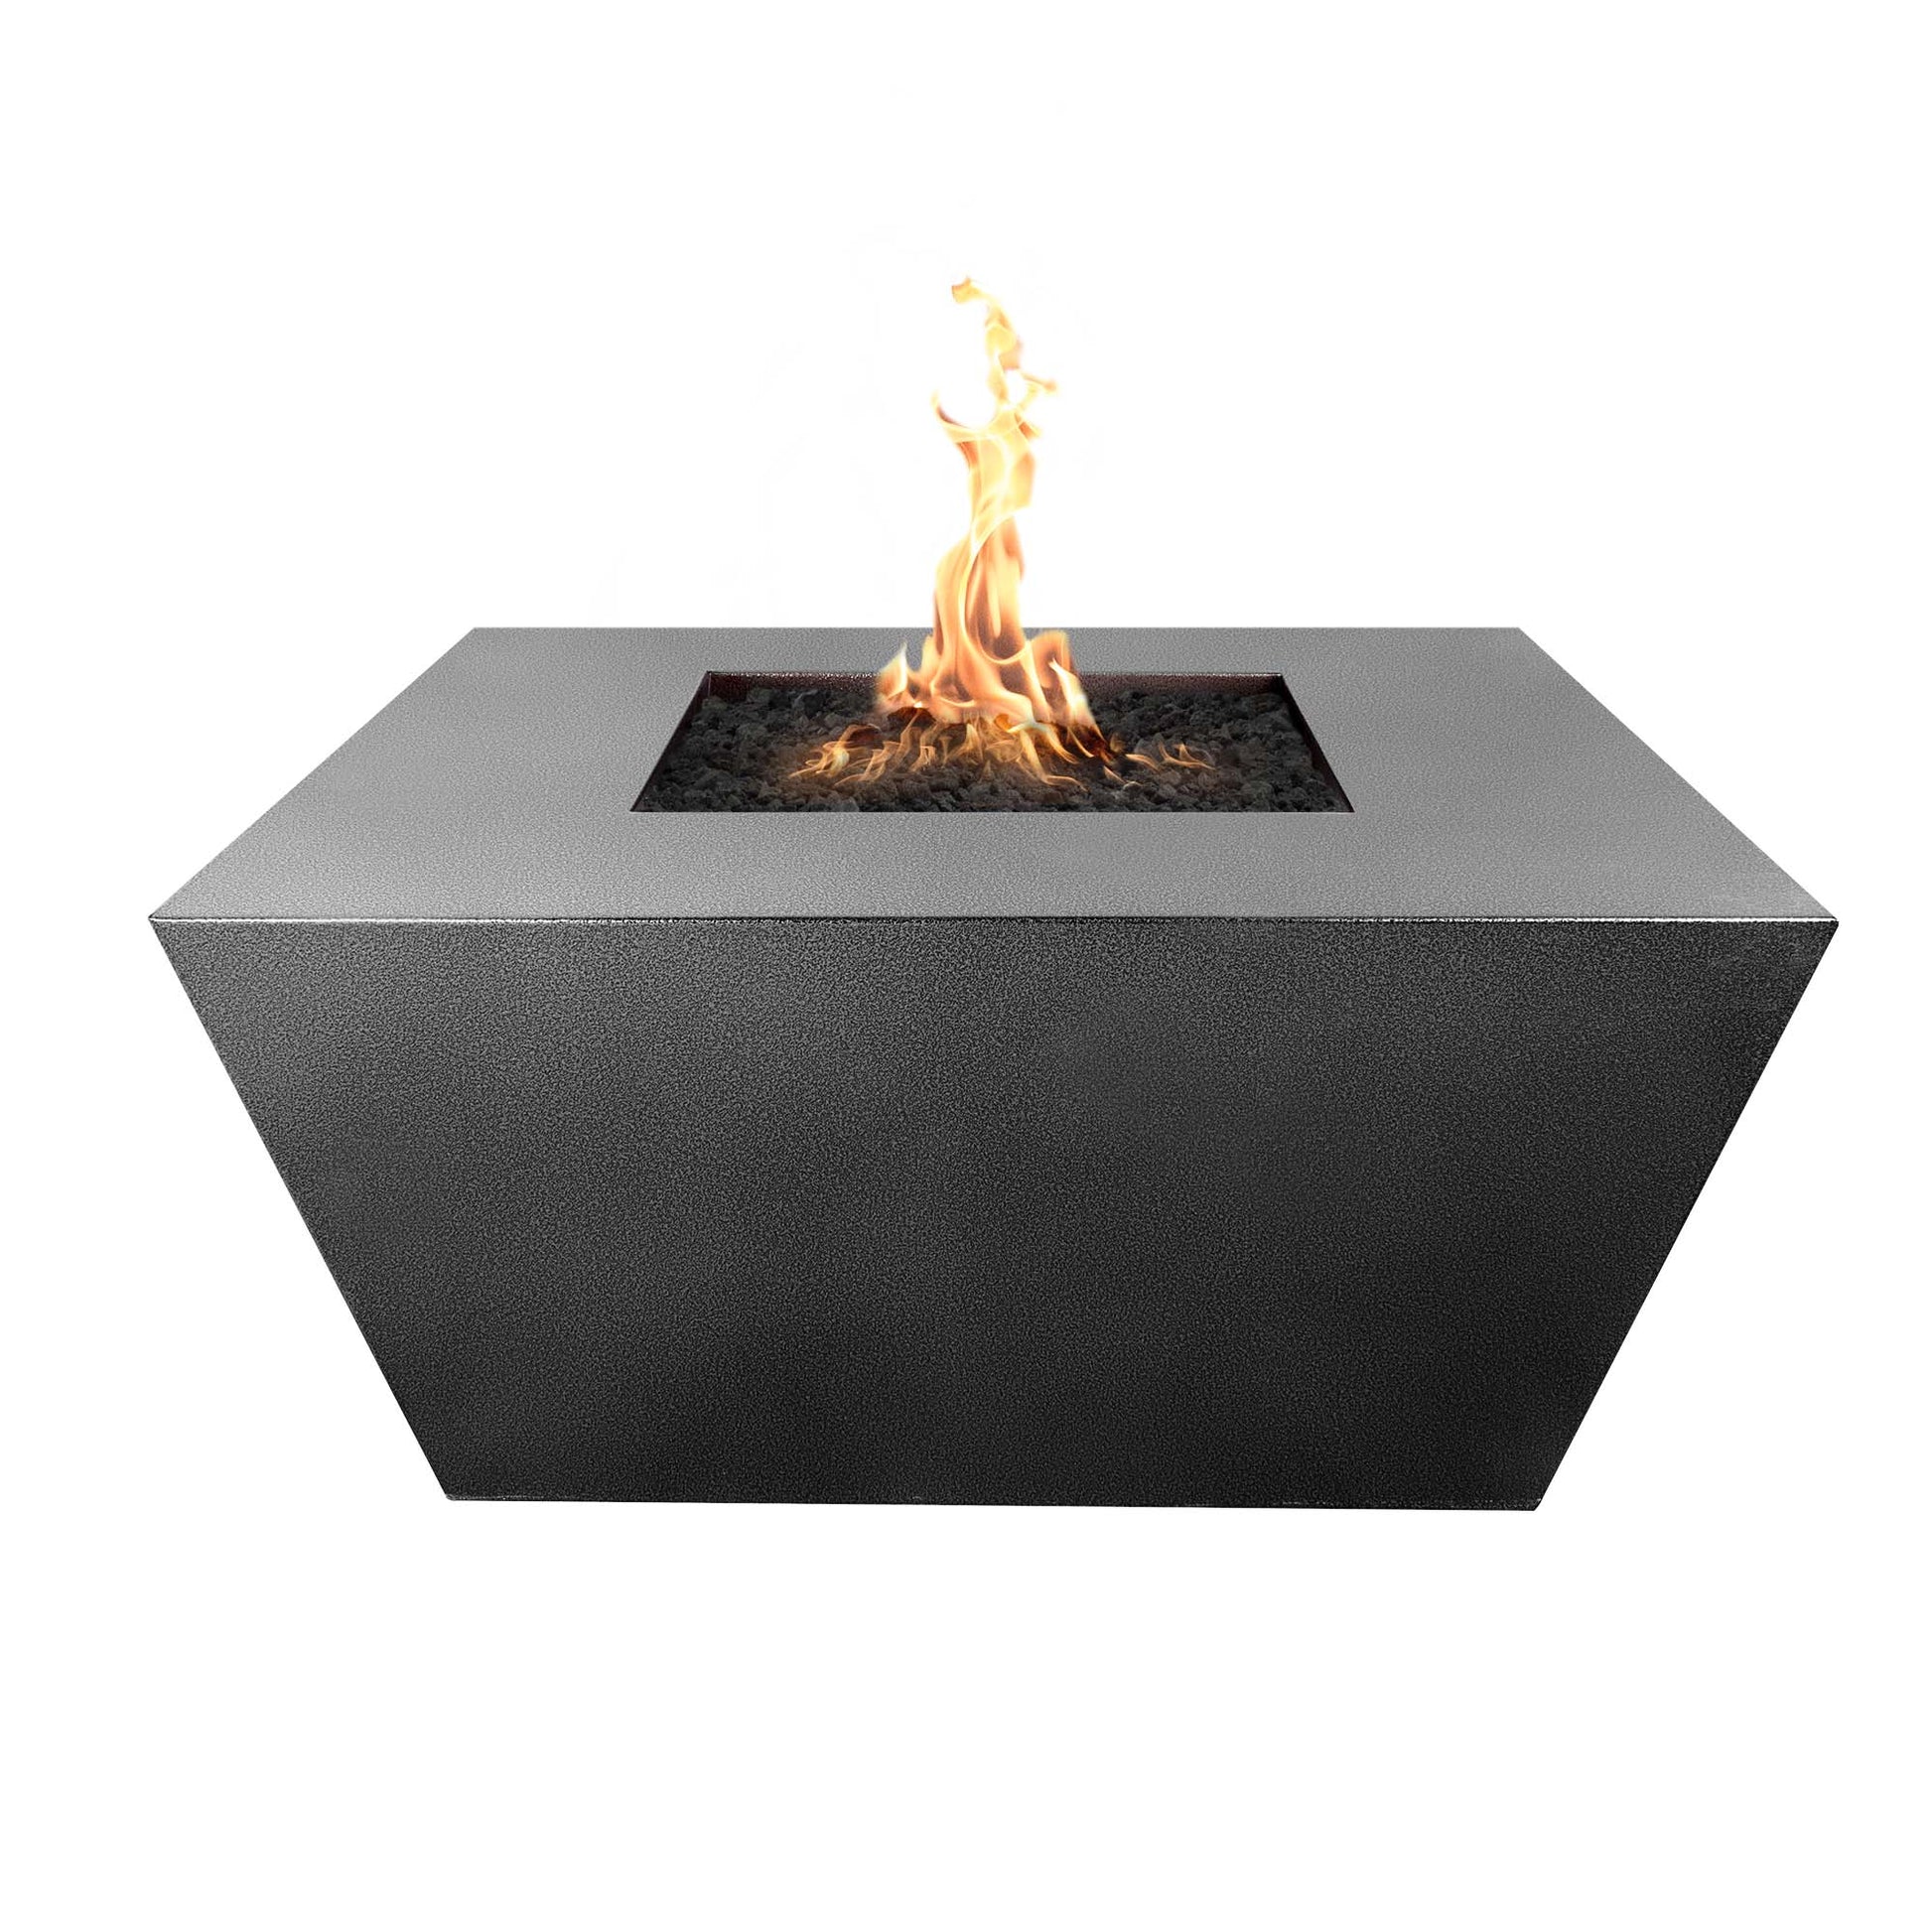 The Outdoor Plus Square Redan 36" Copper Vein Powder Coated Metal Liquid Propane Fire Pit with 110V Electronic Ignition